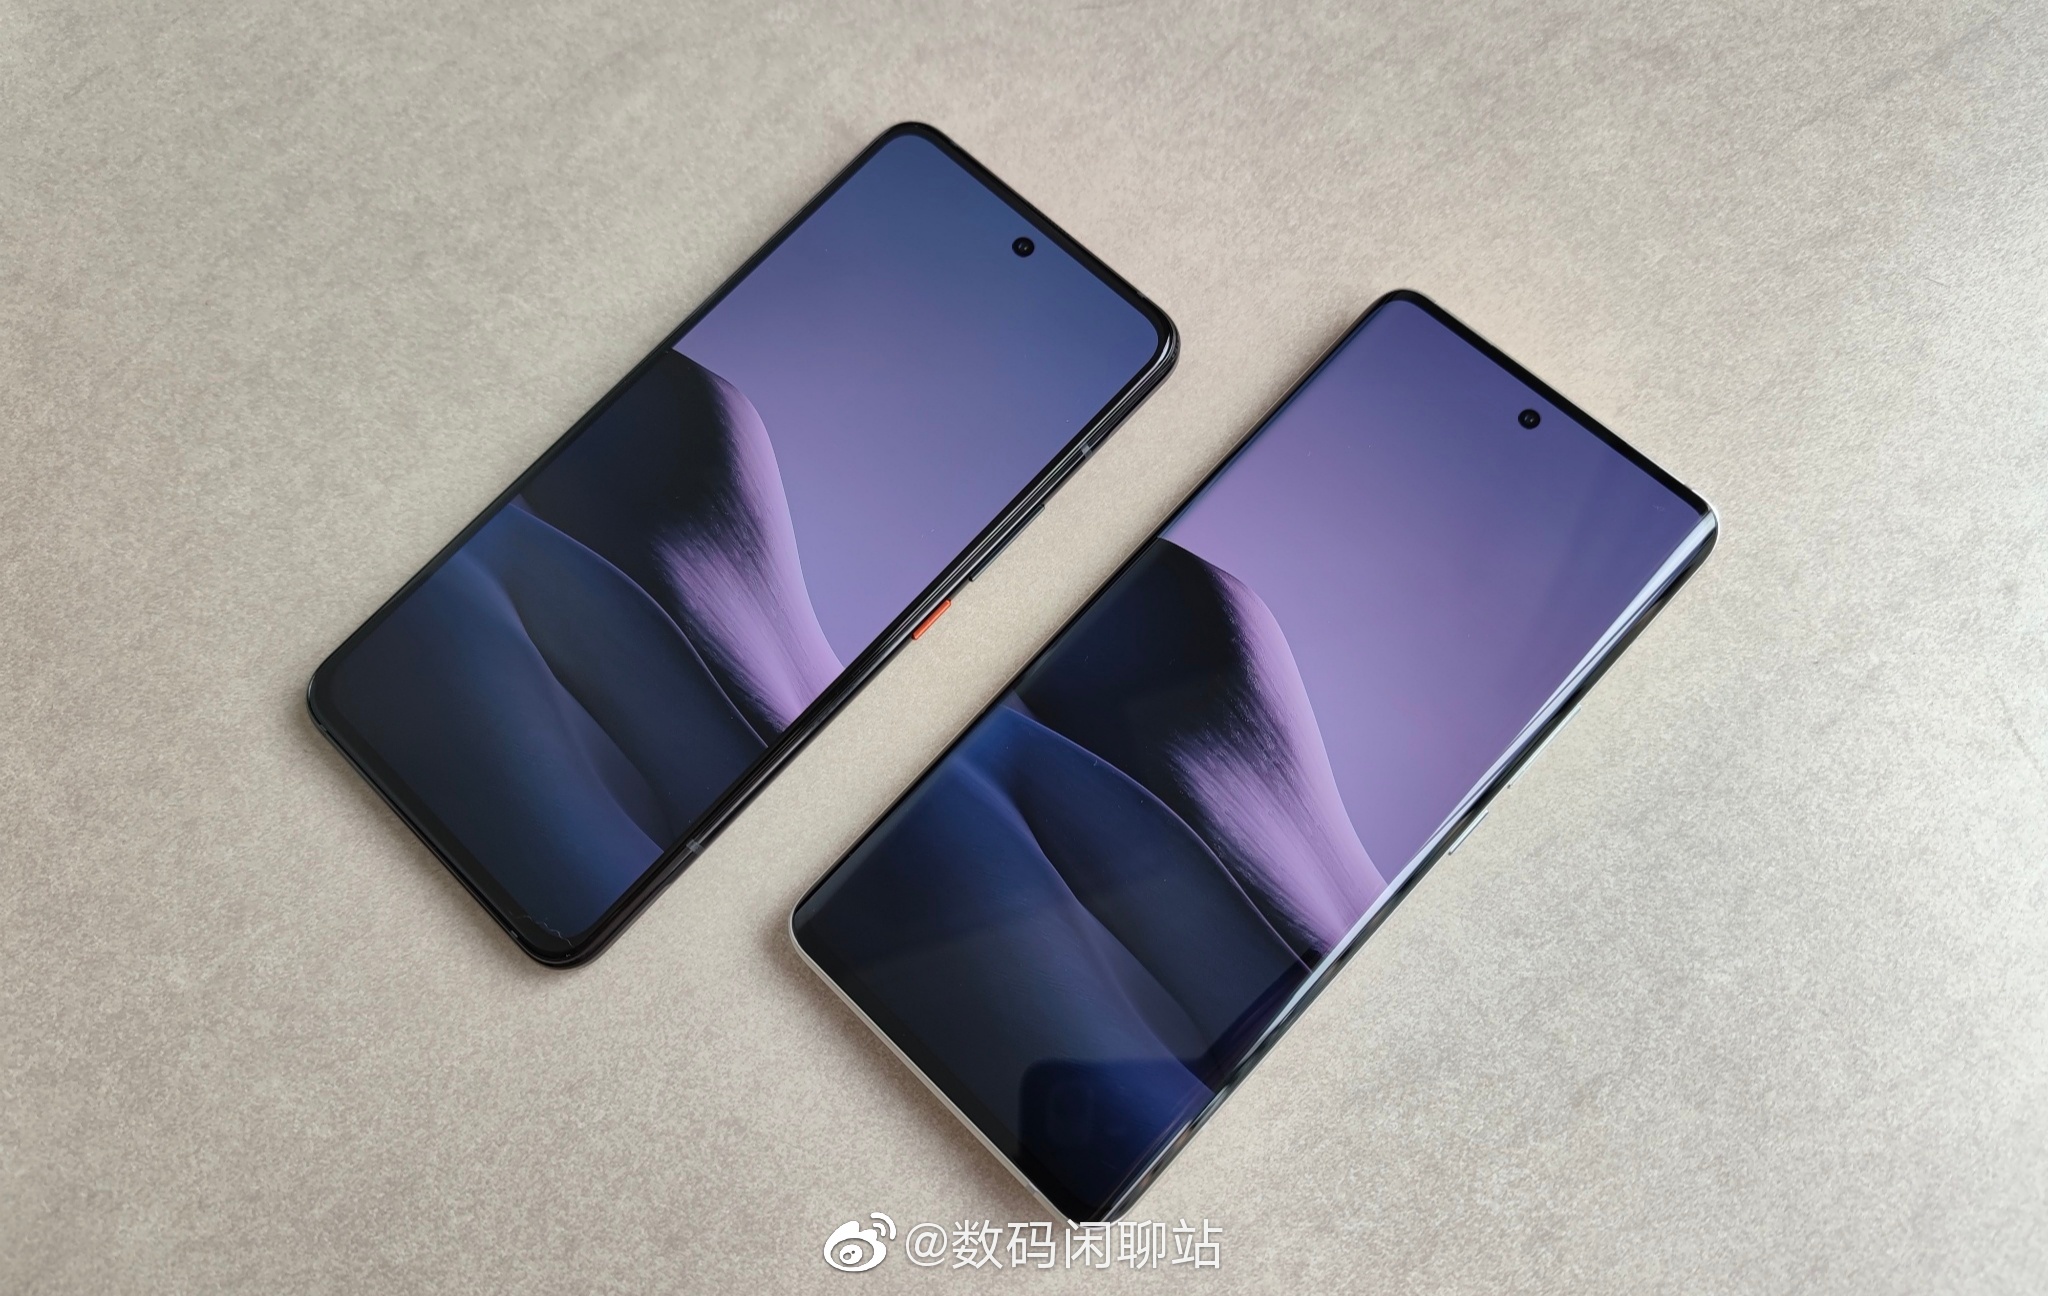 Live image of the upcoming Xiaomi Mi 11 and Mi 11 Pro